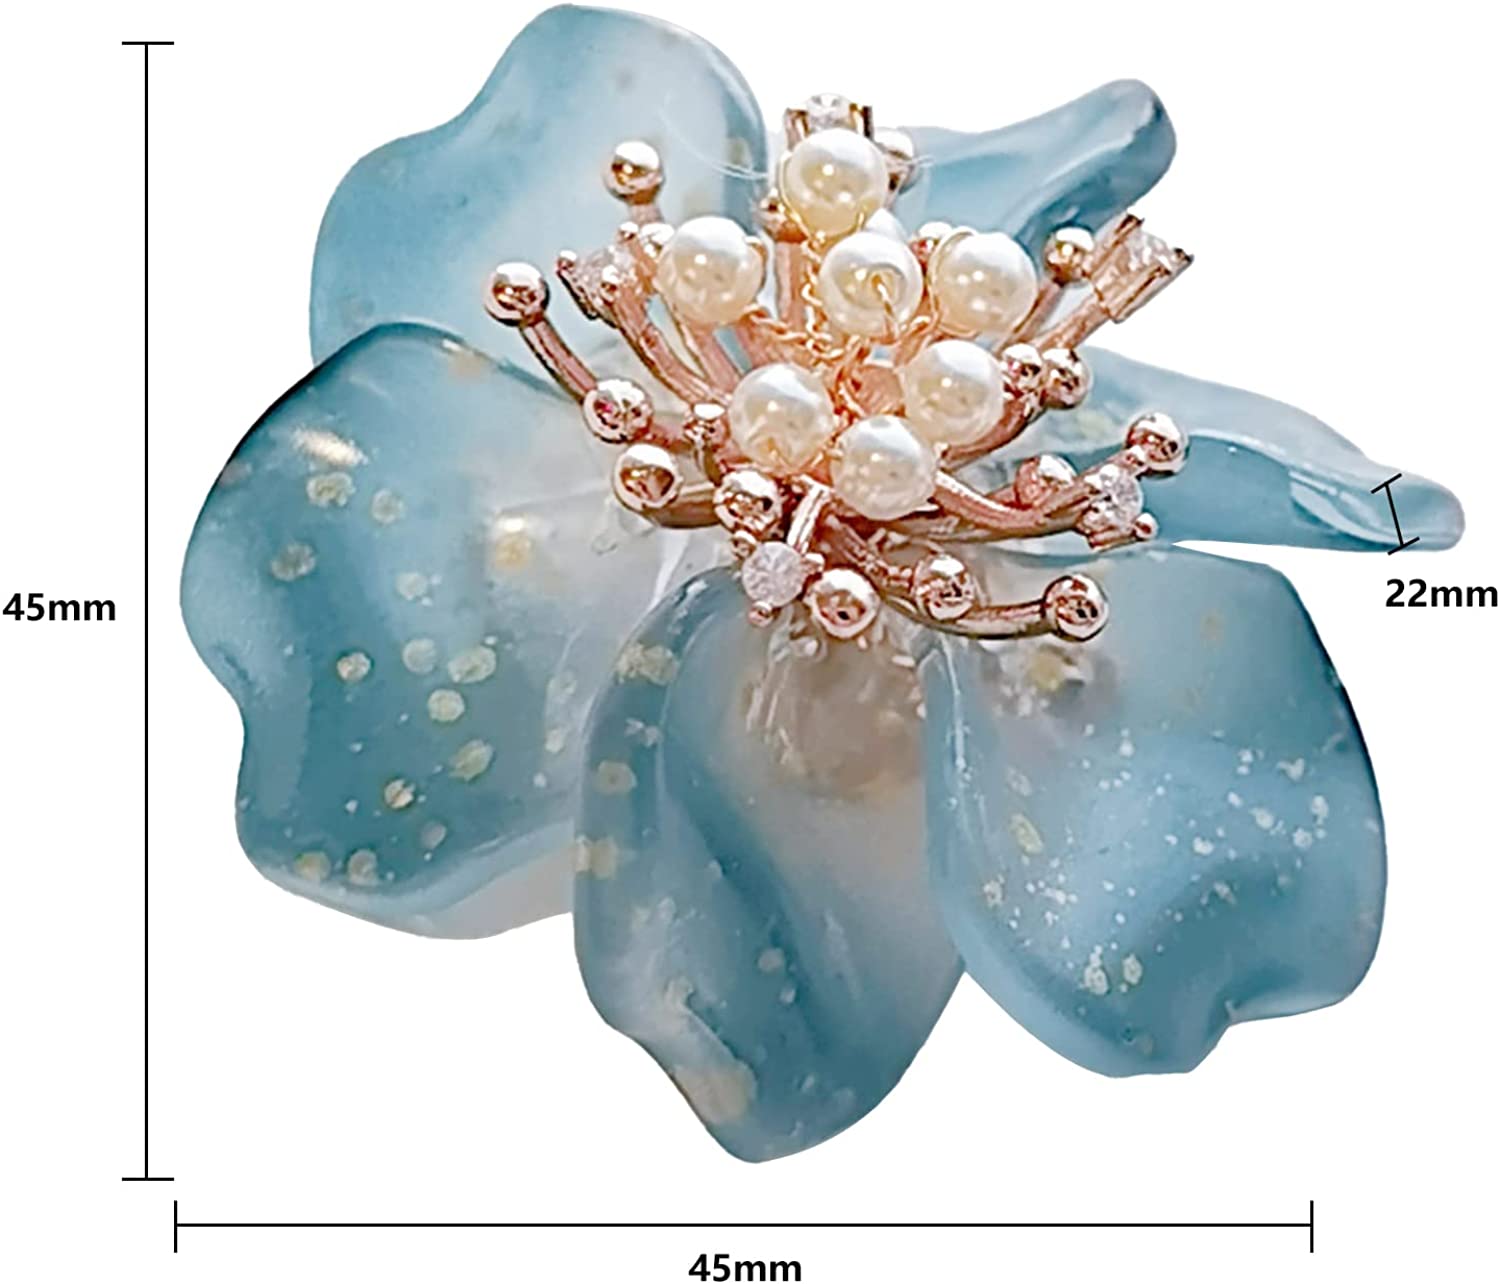 CCijiNG Flower Brooch Pins for Women Girl Fashion Crystal/Colored